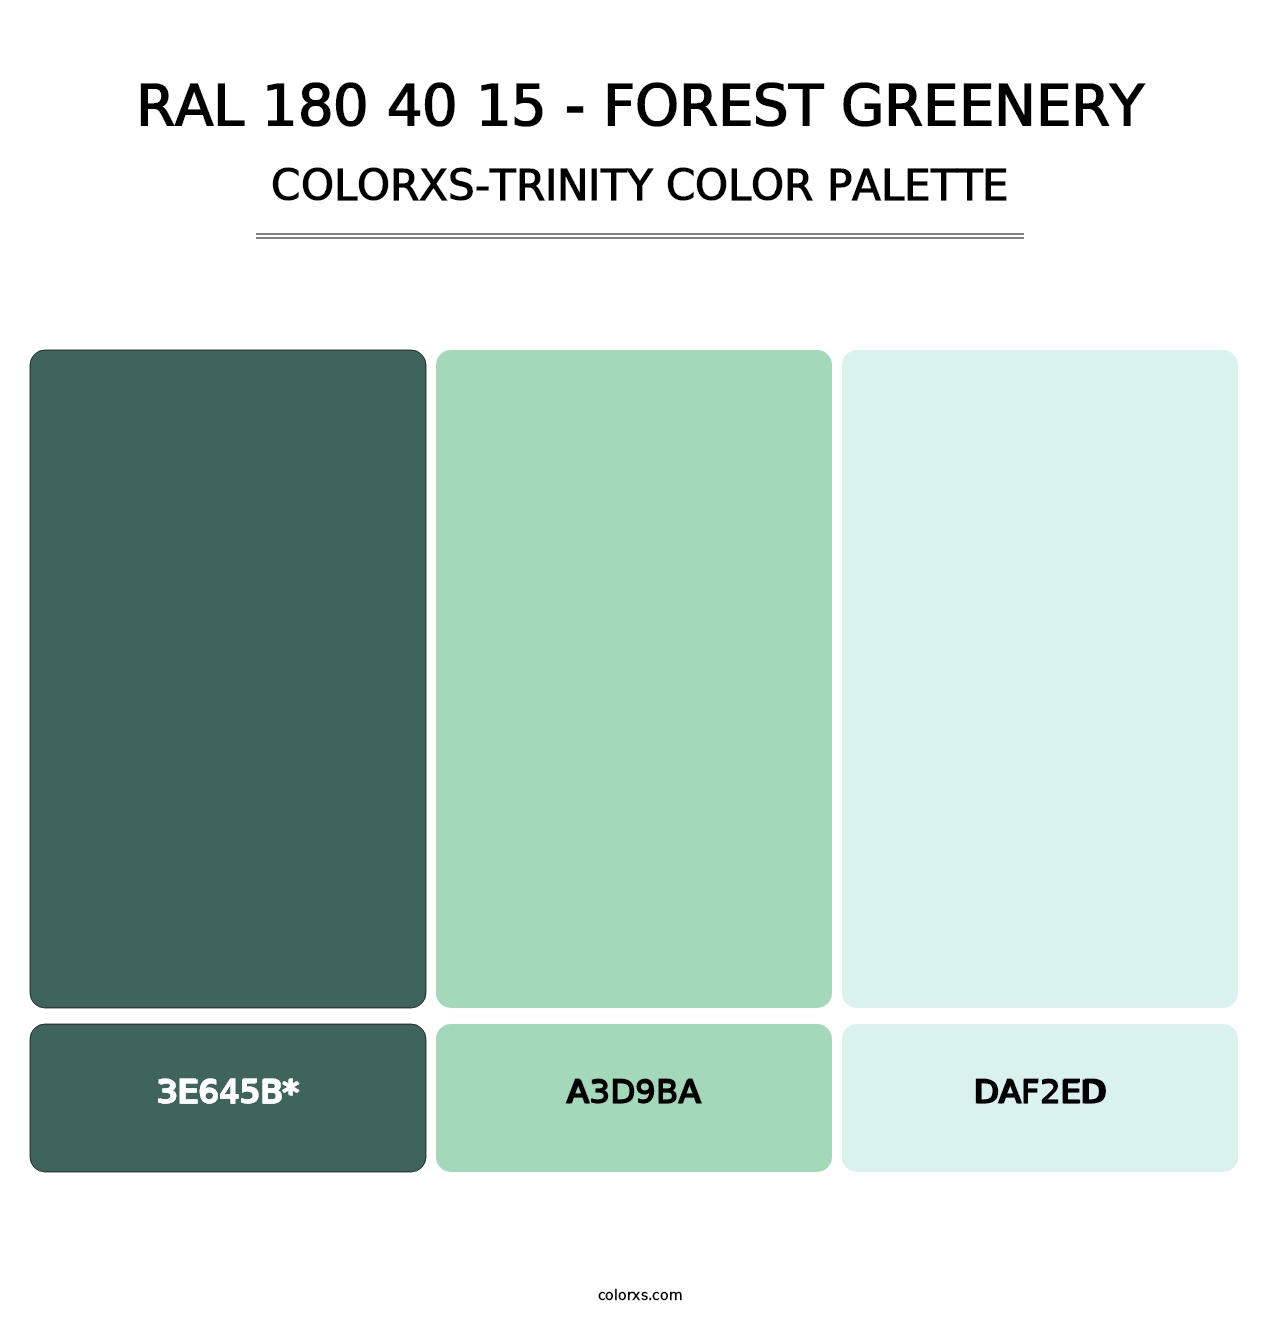 RAL 180 40 15 - Forest Greenery - Colorxs Trinity Palette